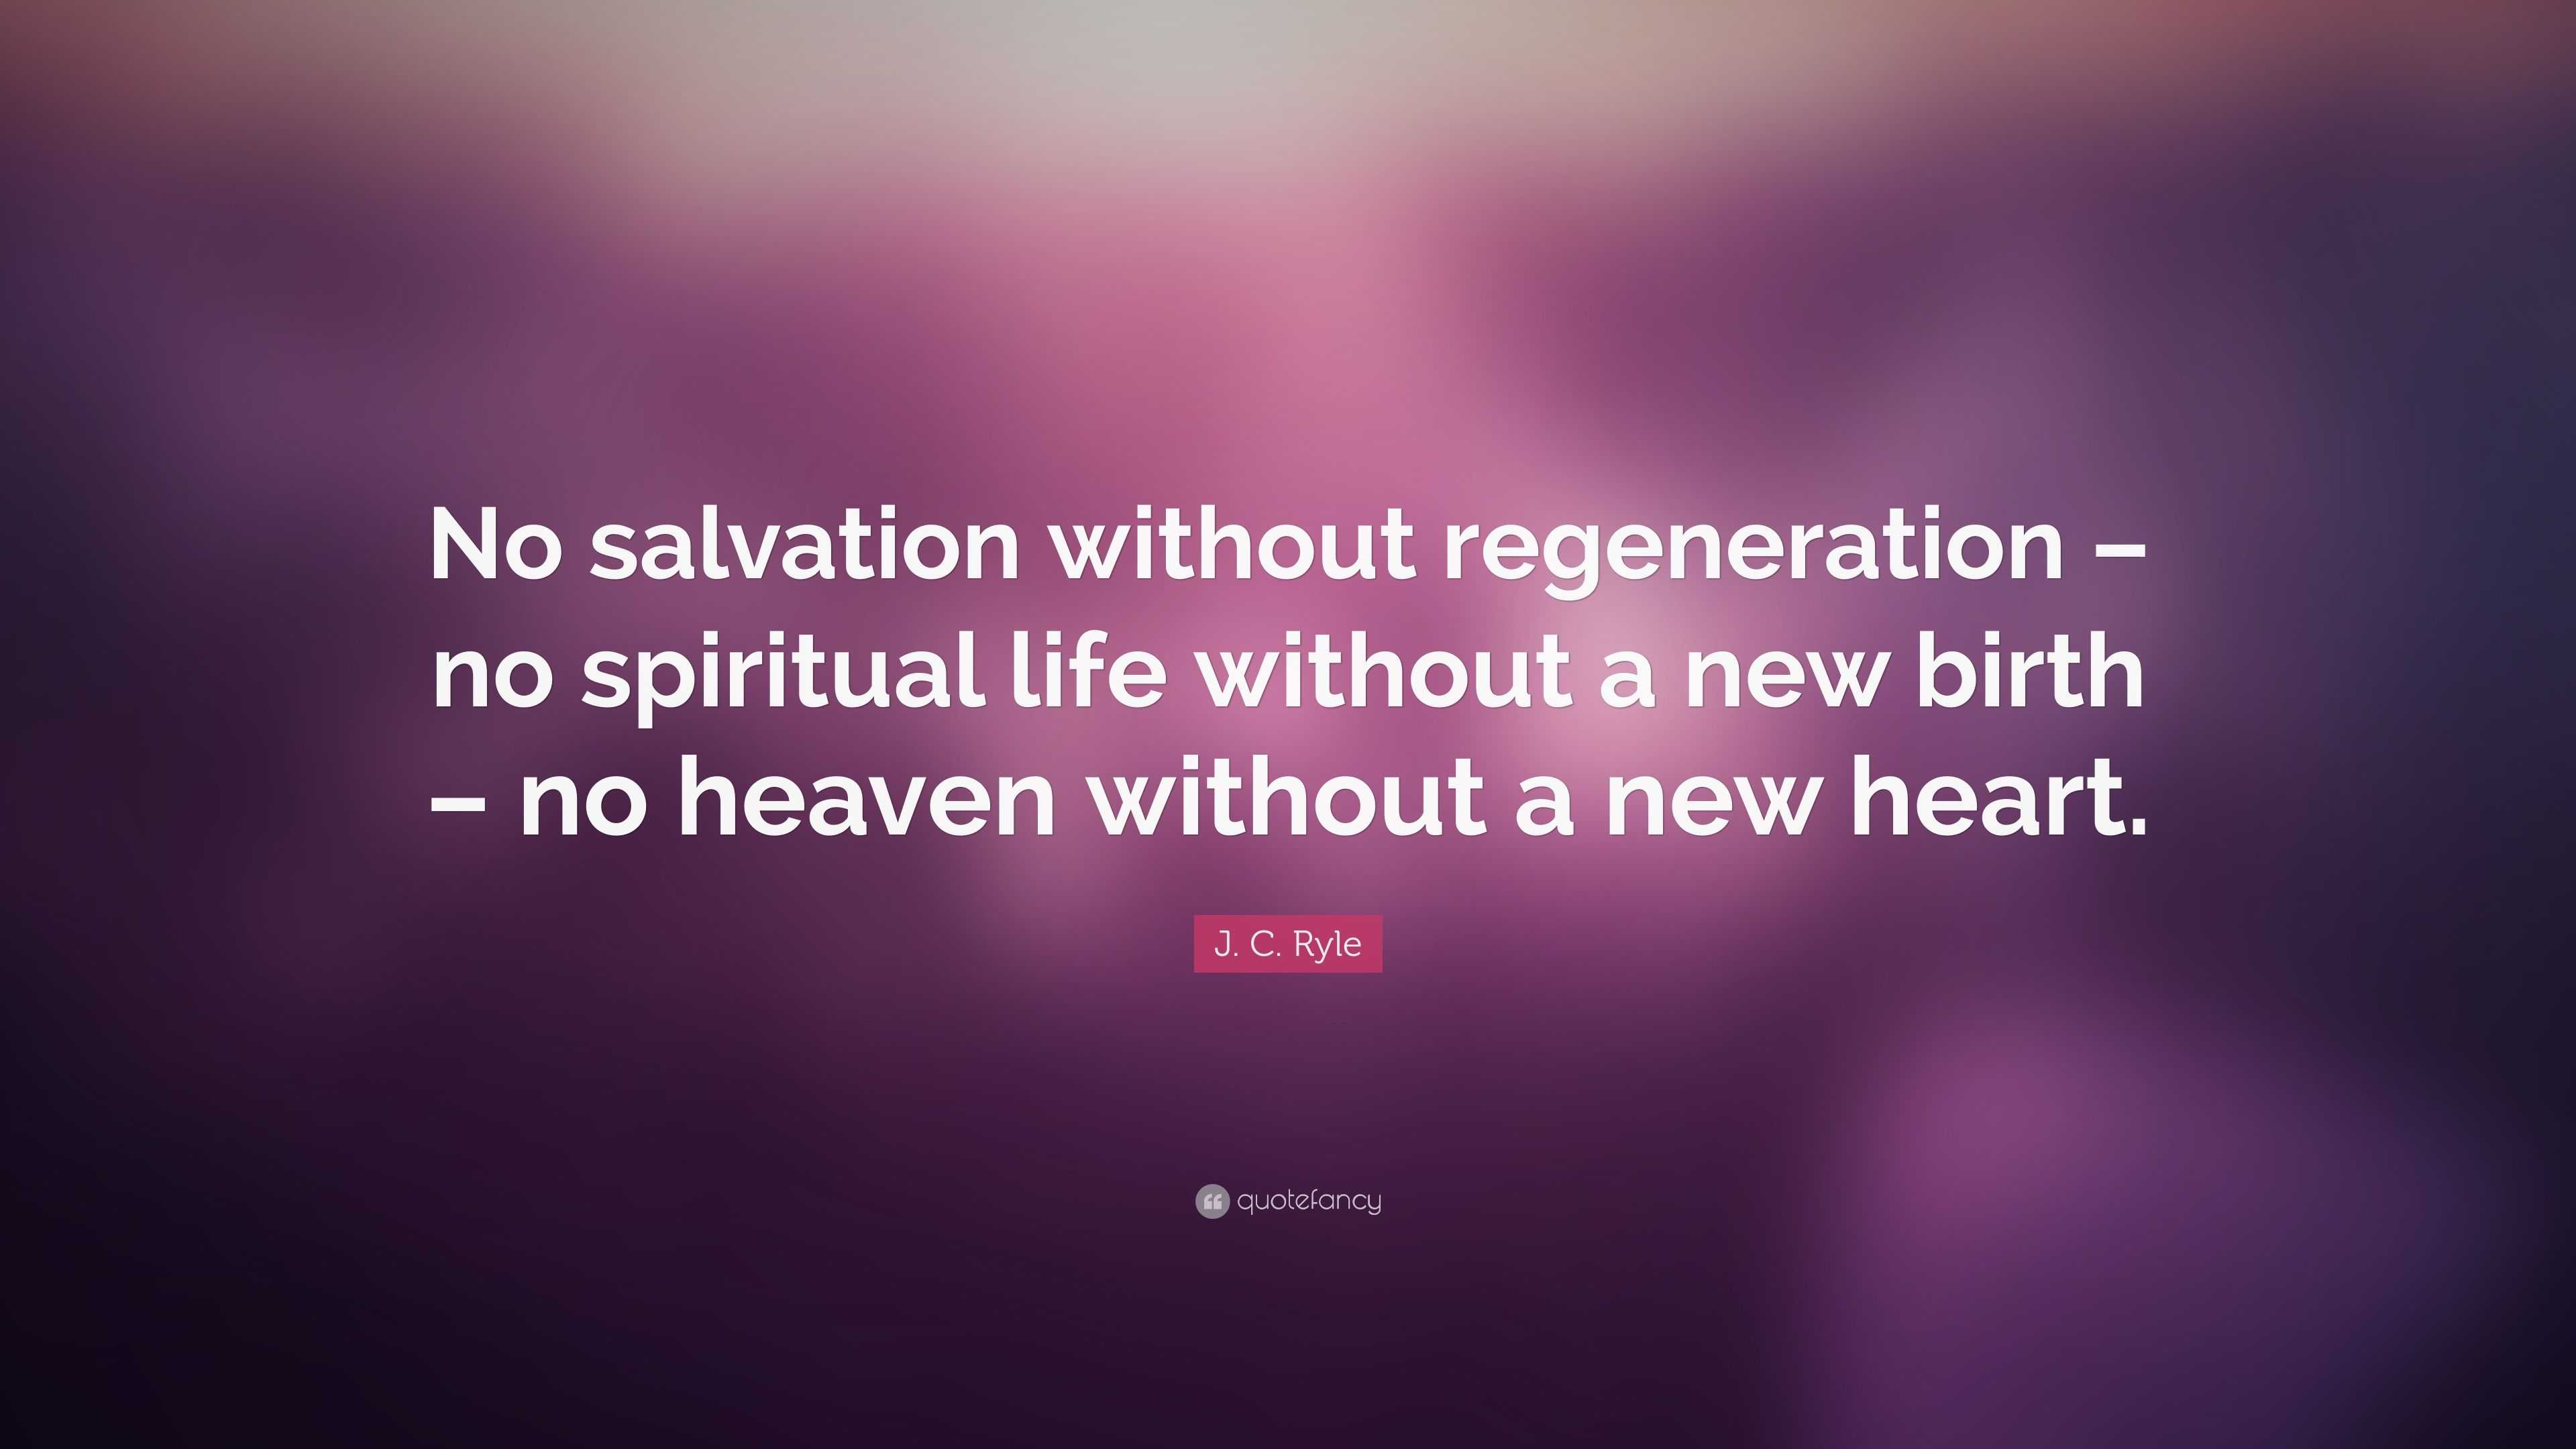 J C Ryle Quote “No salvation without regeneration – no spiritual life without a new